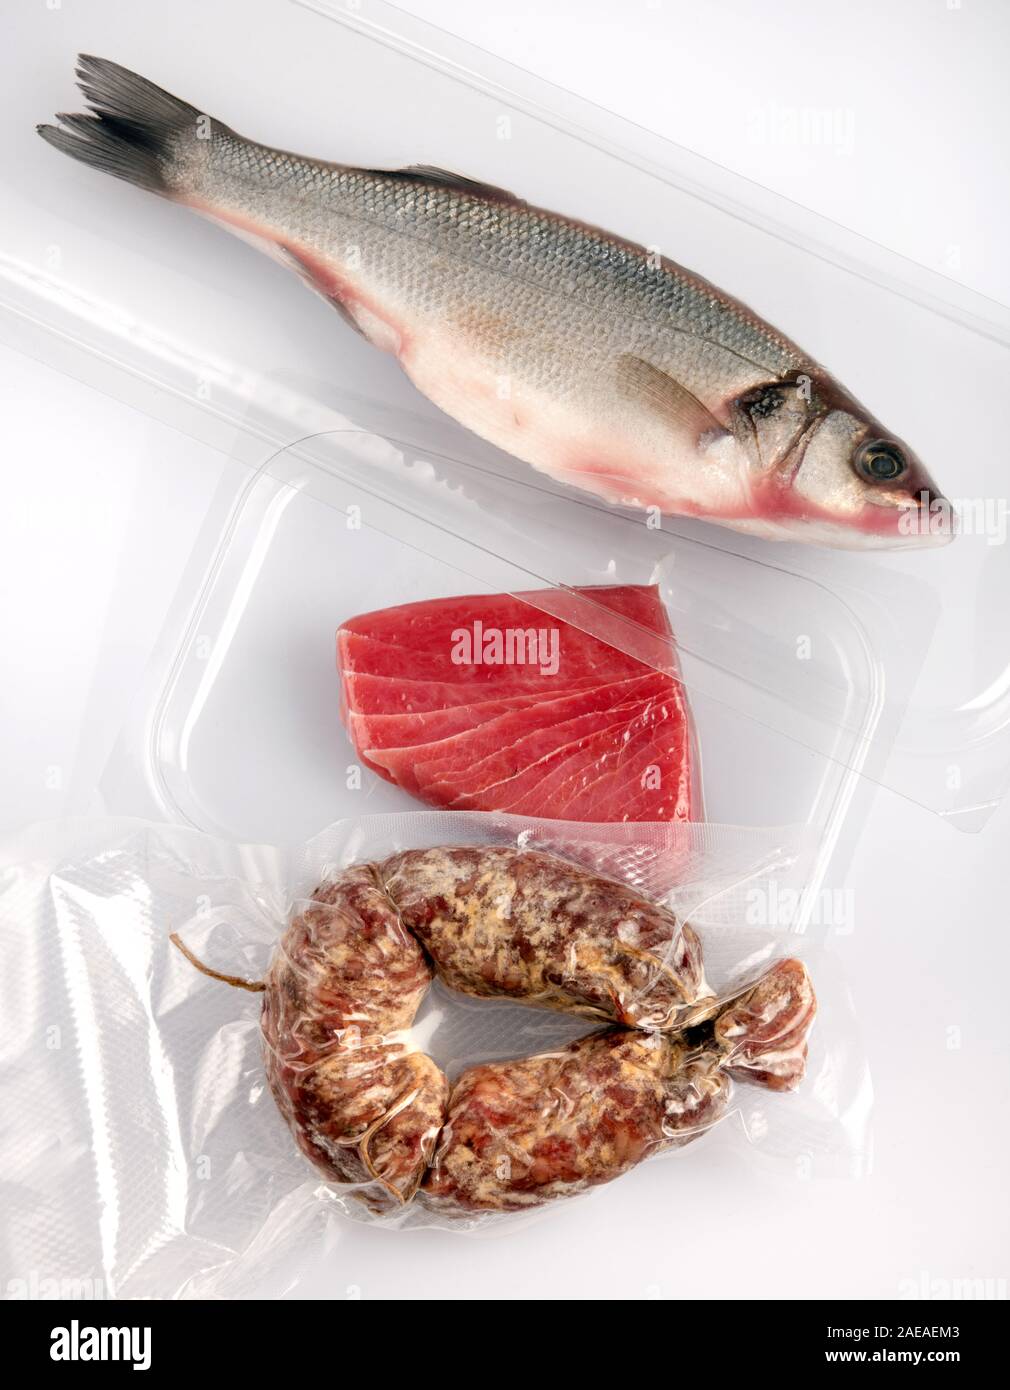 Assorted fresh foods vacuum packed in plastic for storage with a whole cleaned fish, tuna steak and spicy sausage laid out on a white table viewed fro Stock Photo